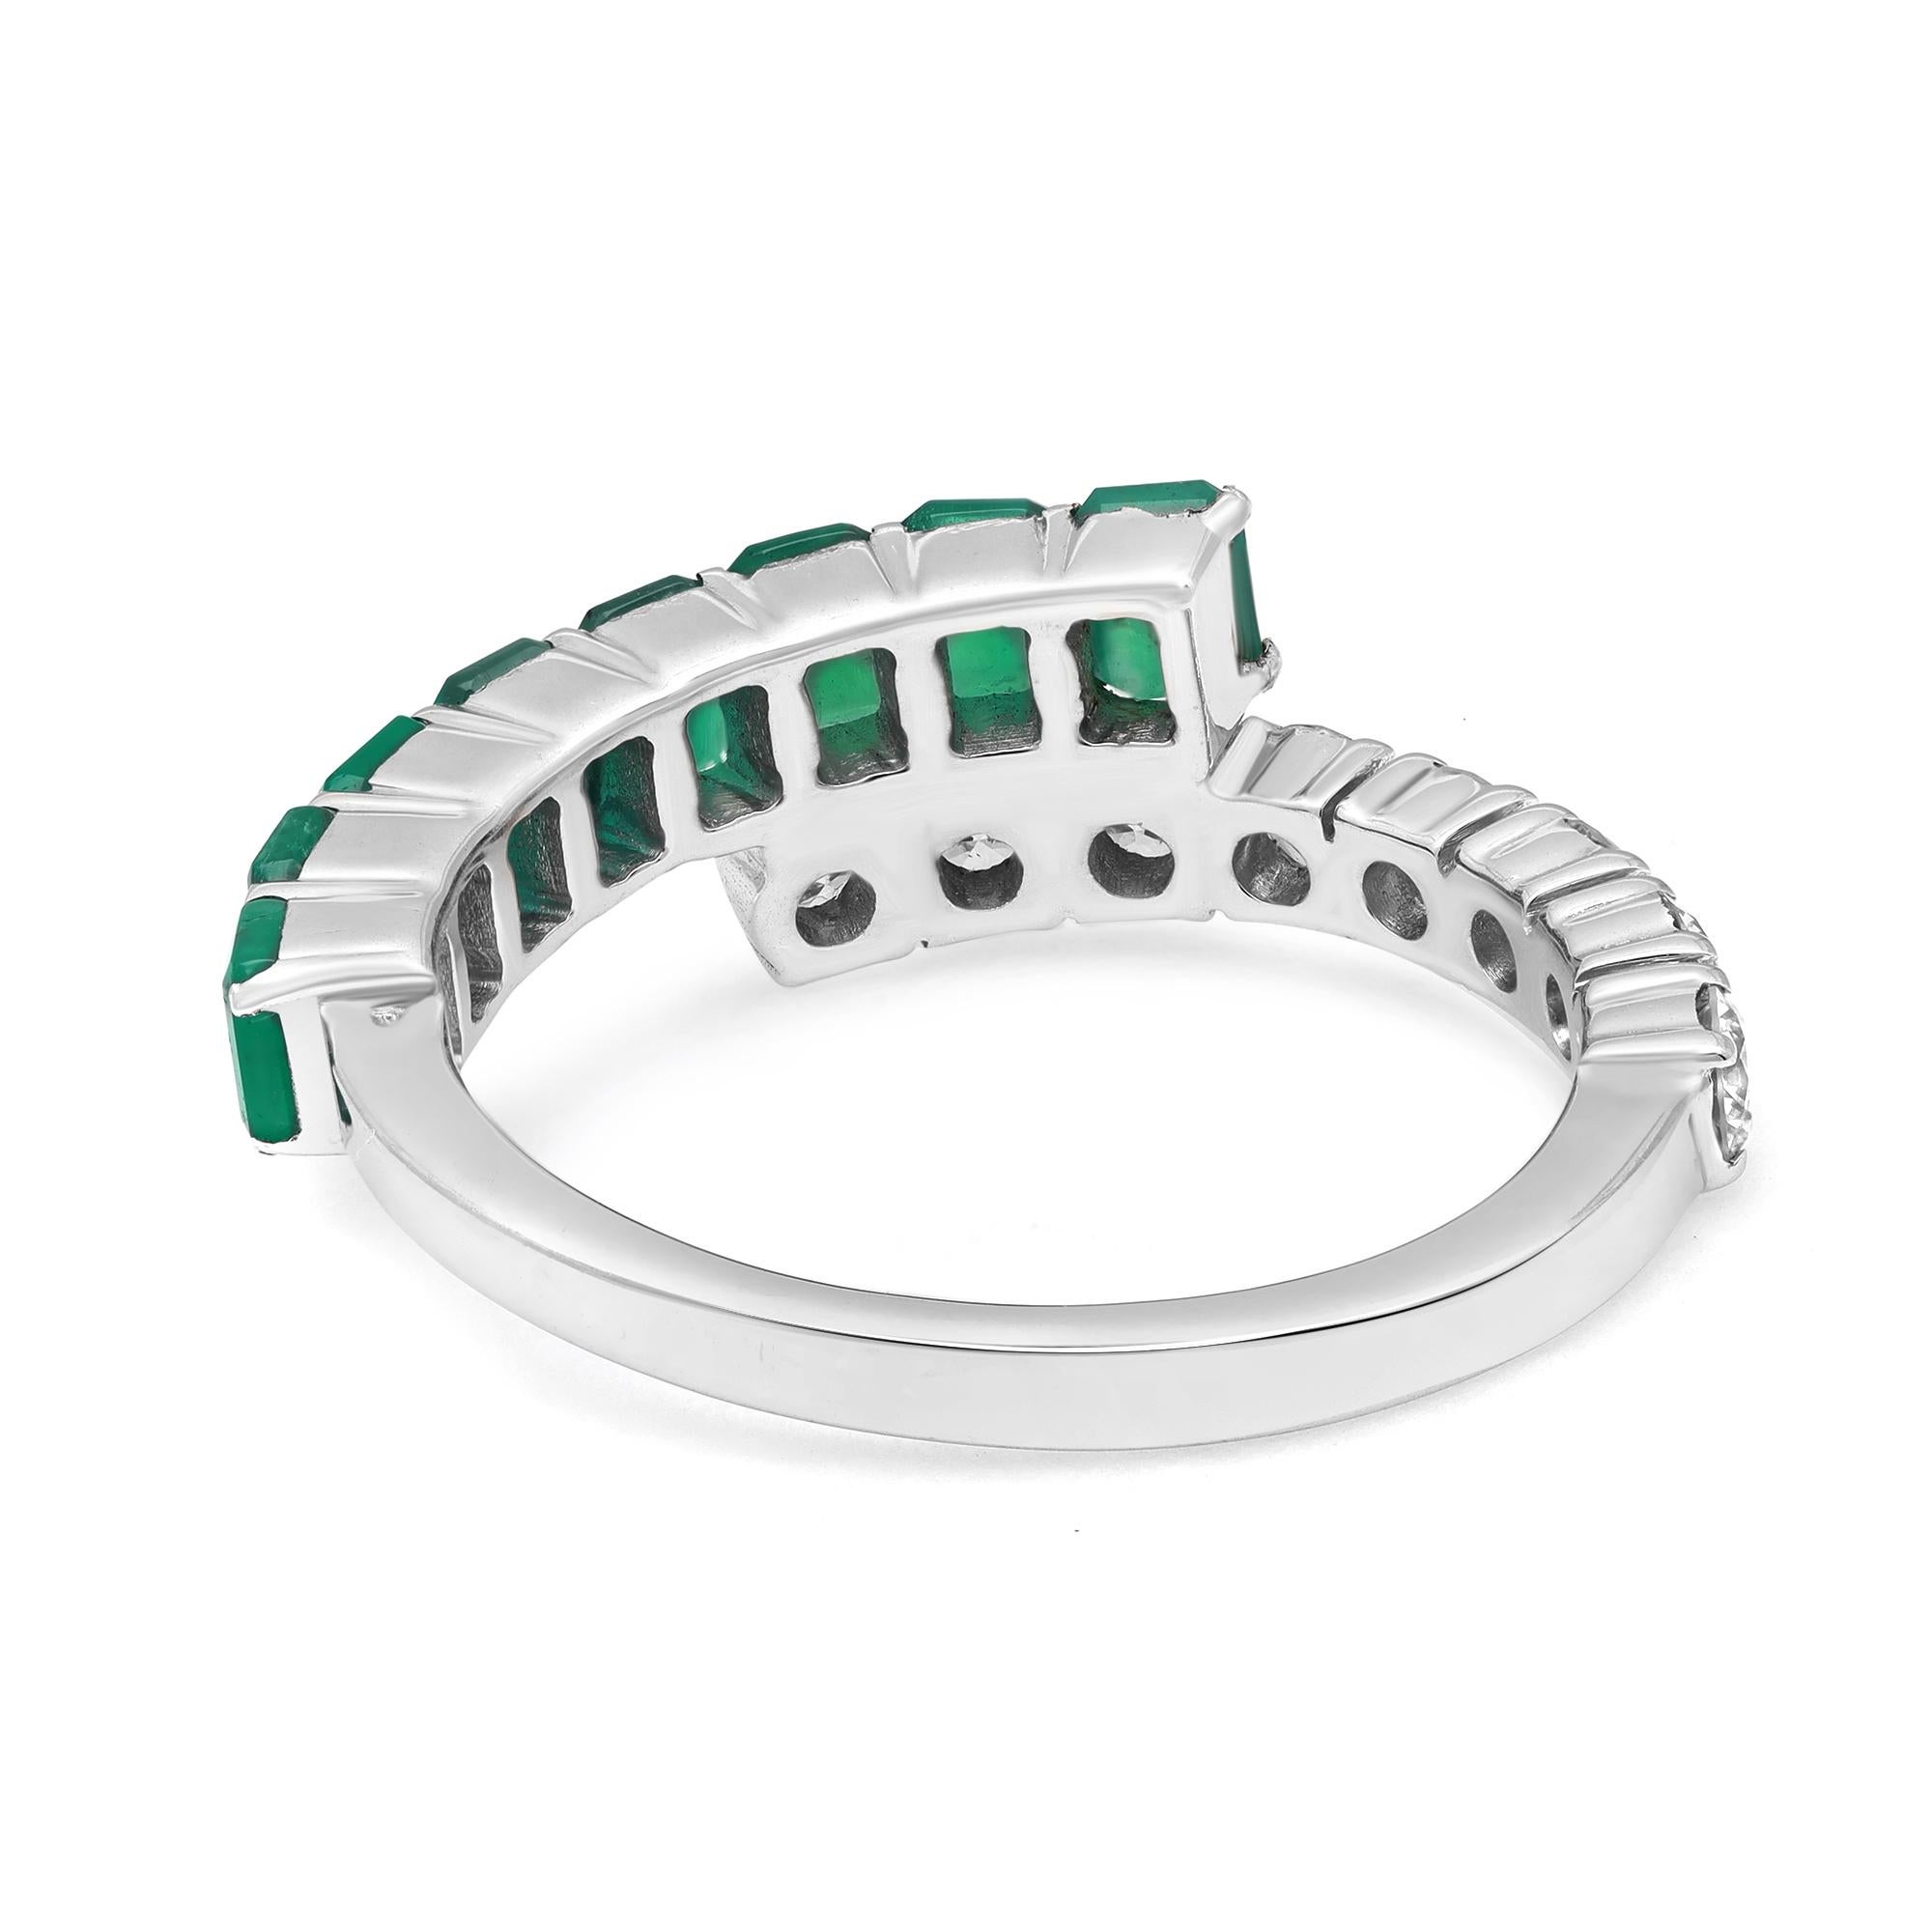 Emerald Cut 1.00Cttw Emerald and 0.61Cttw Diamond Ladies Ring 14K White Gold For Sale